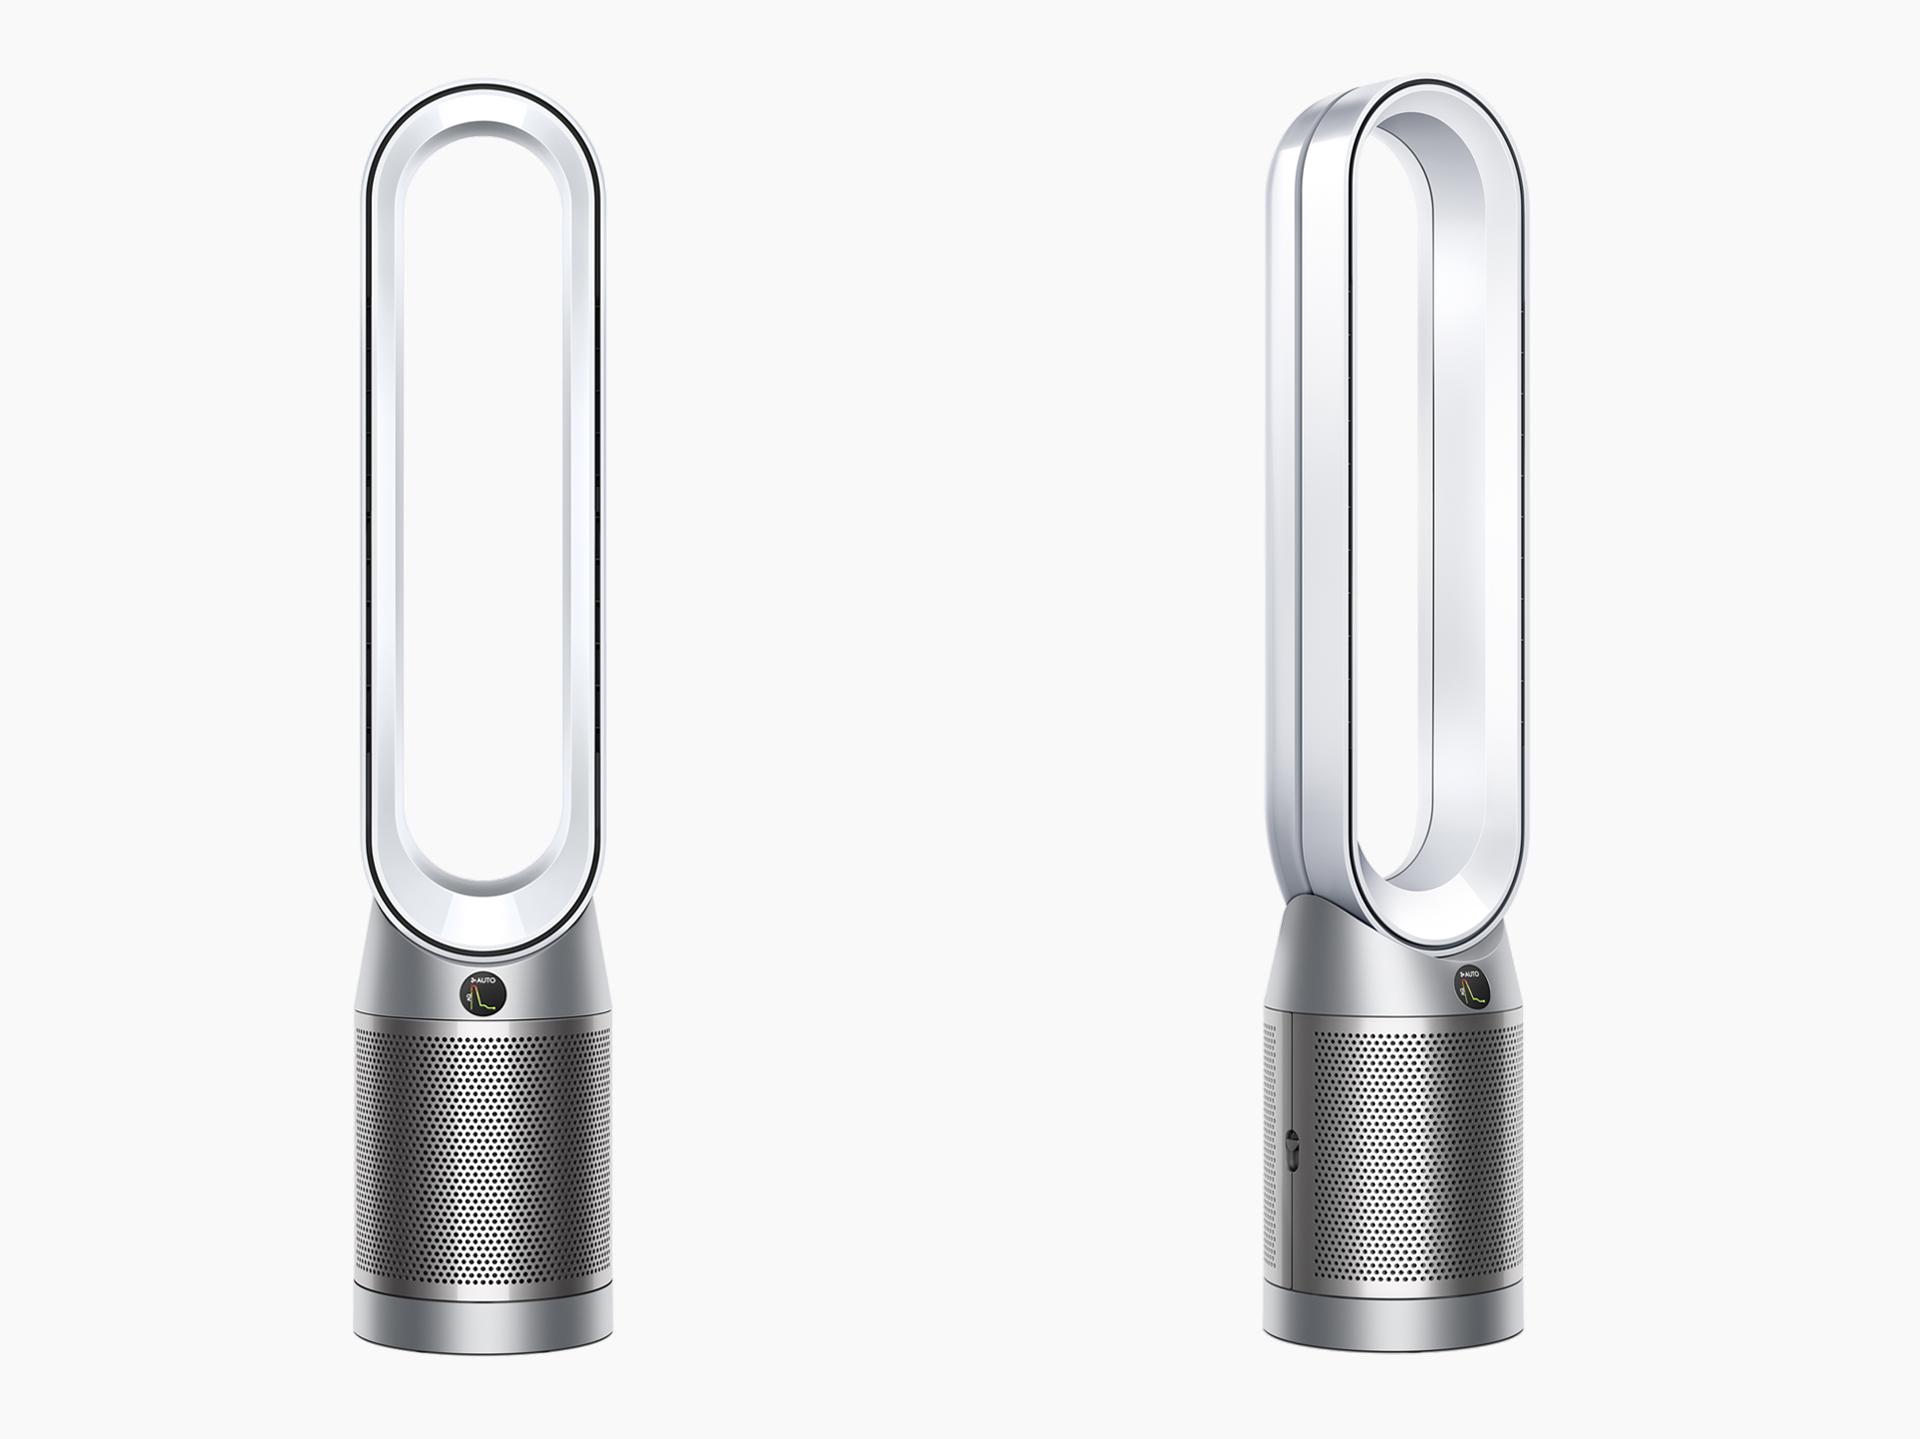 Dyson Purifier Cool Autoreact air purifier front and side views